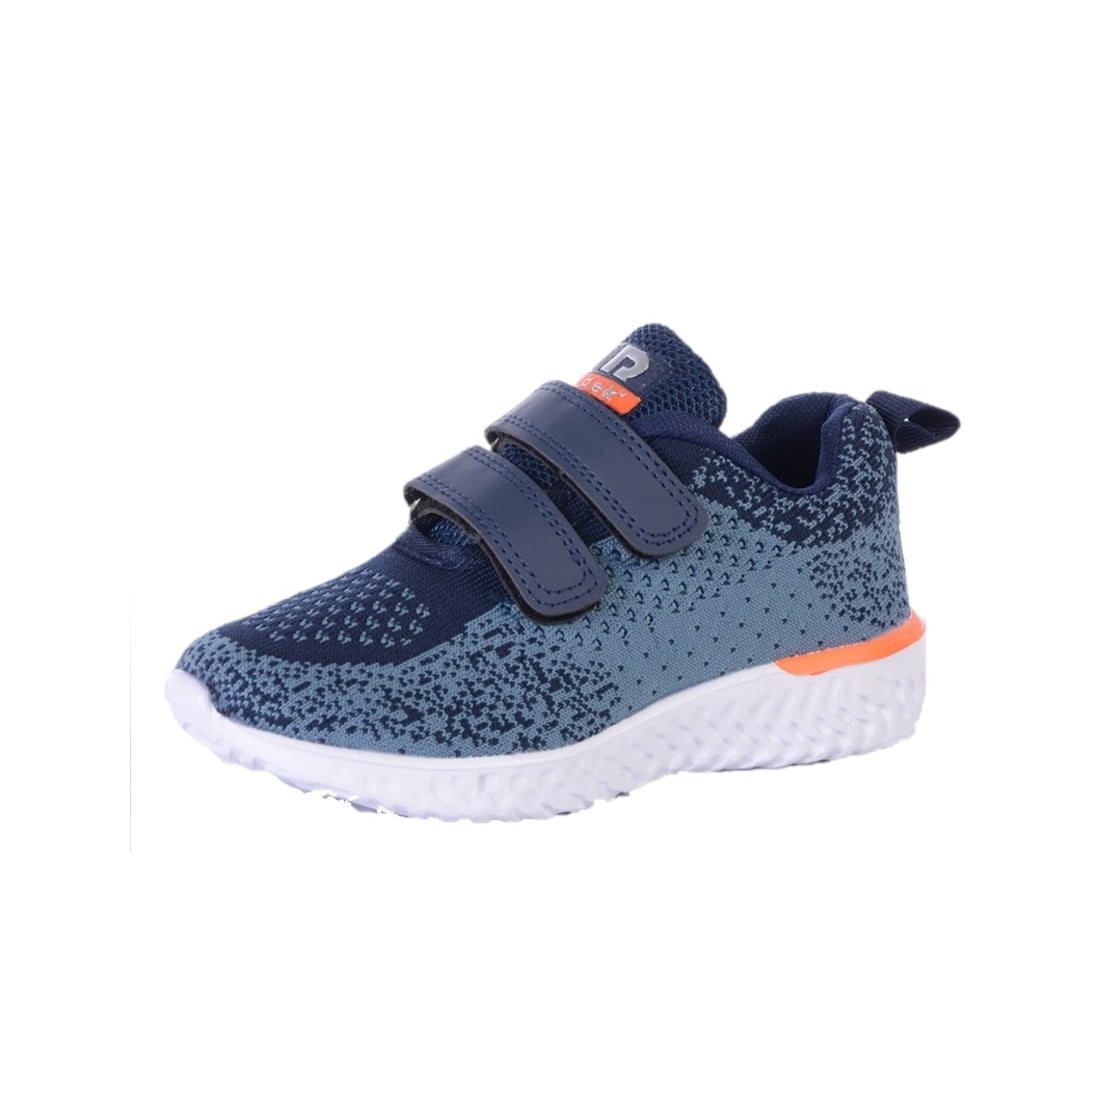 KIDS BOYS GIRLS YOUTH UNISEX SUPERLIGHT CASUAL TOUCH STRAP SPORTS TRAINERS SHOES